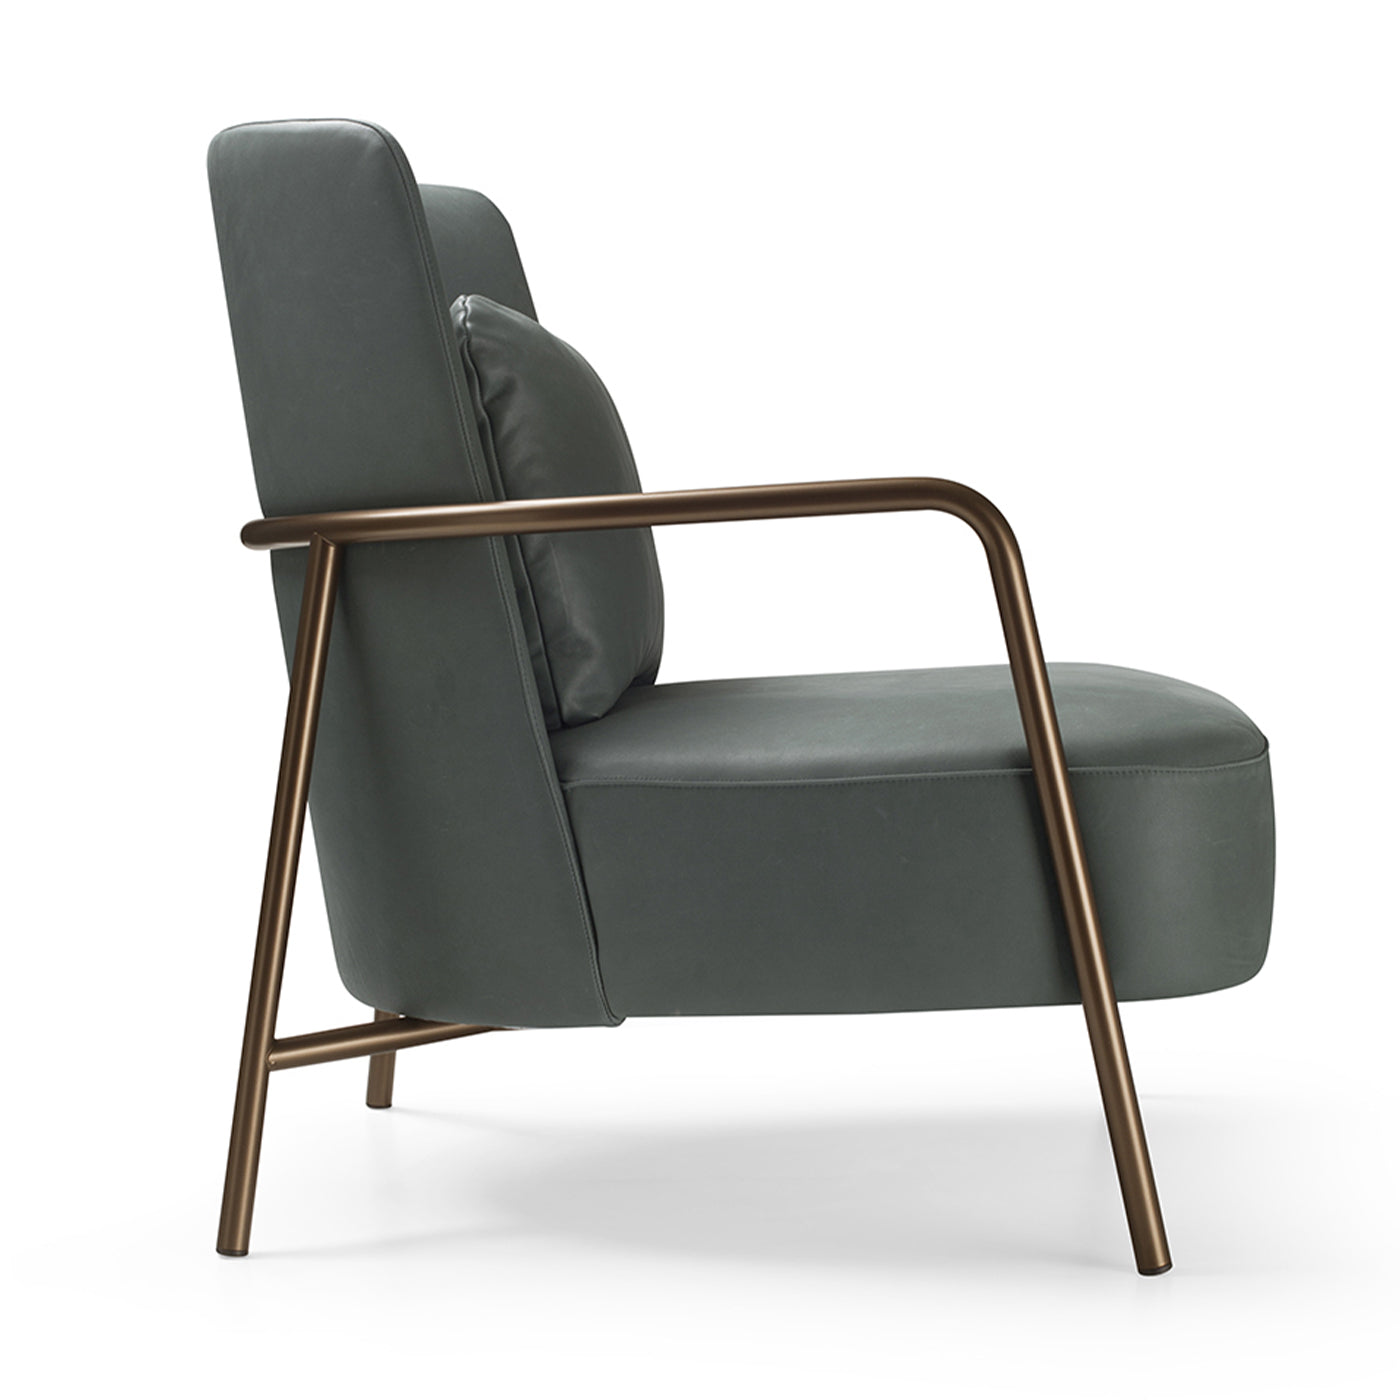 Ilary Green Leather Armchair - Alternative view 2